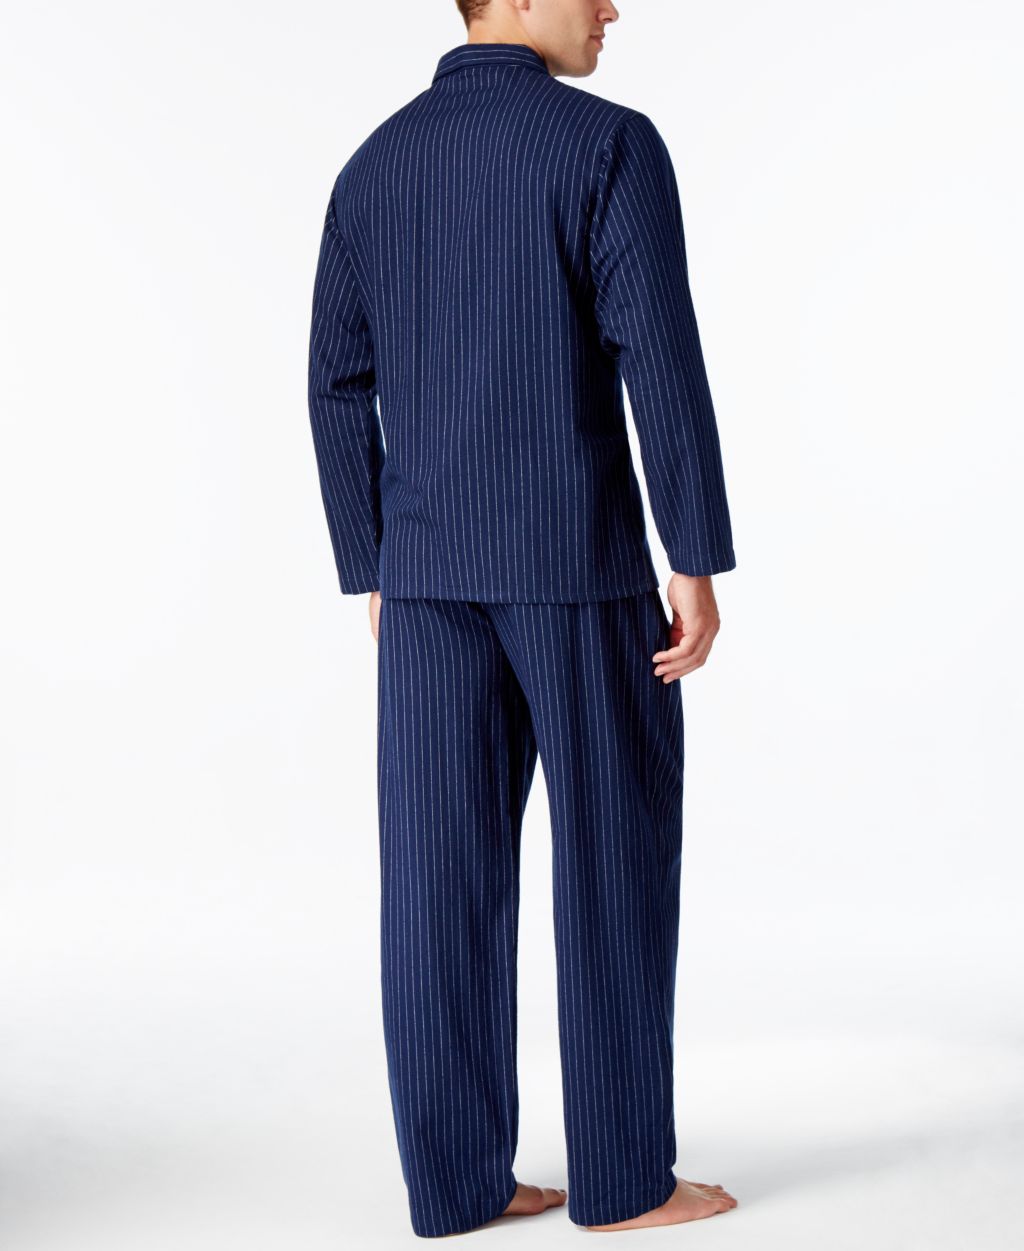 Club Room Spread Collar Men's Pinstriped Flannel Pajama Set, Only at Macy's